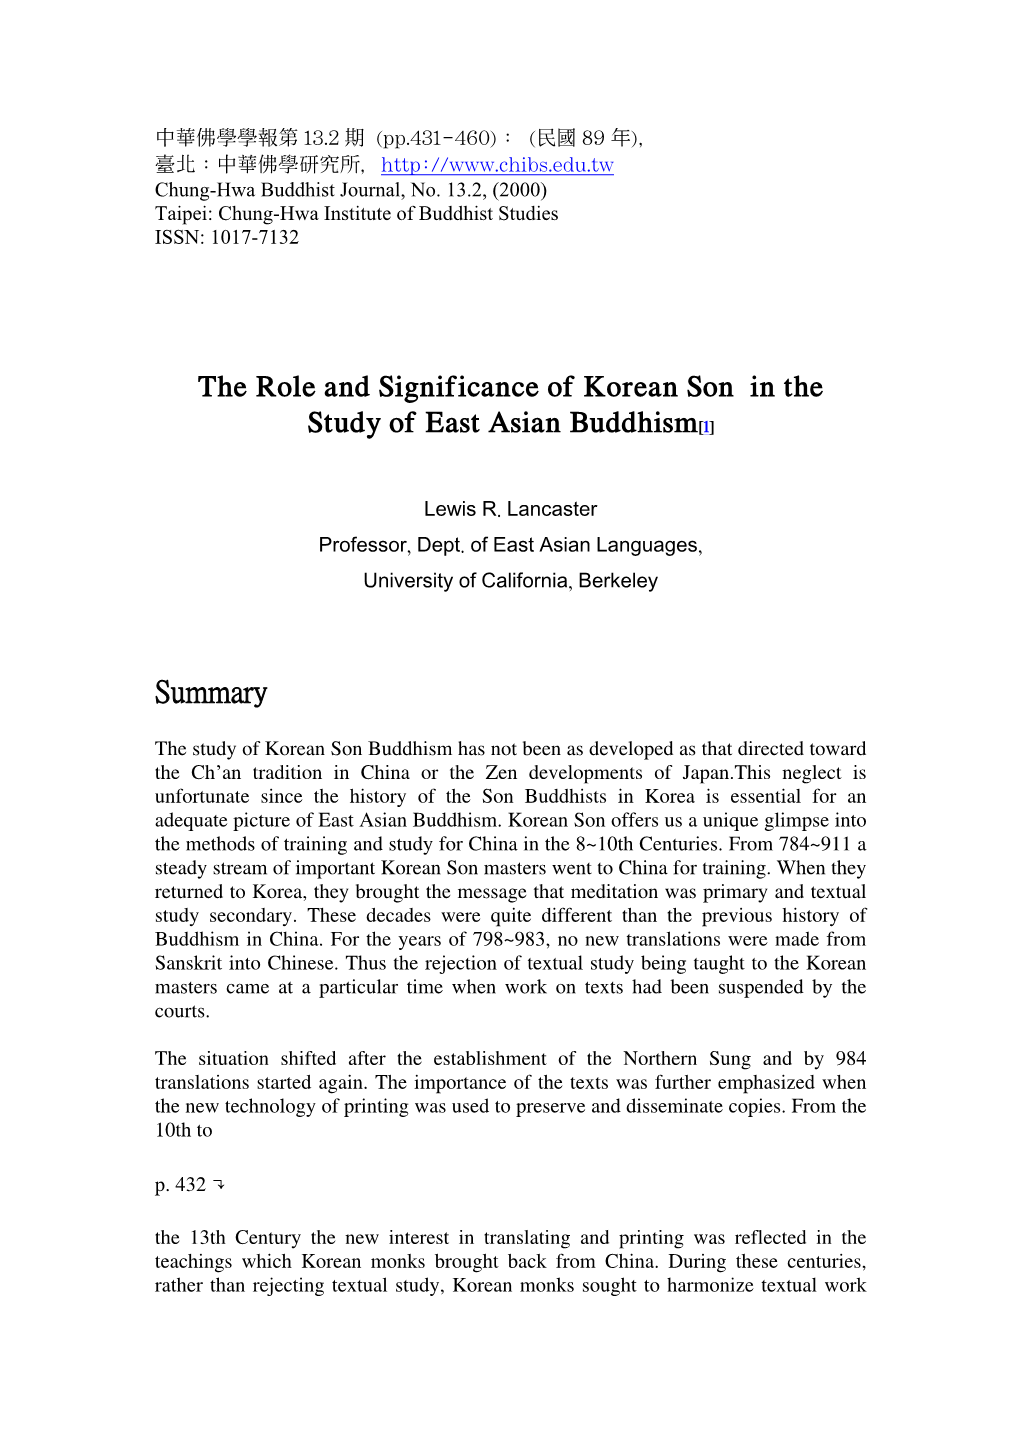 The Role and Significance of Korean Son in the Study of East Asian Buddhism[1]